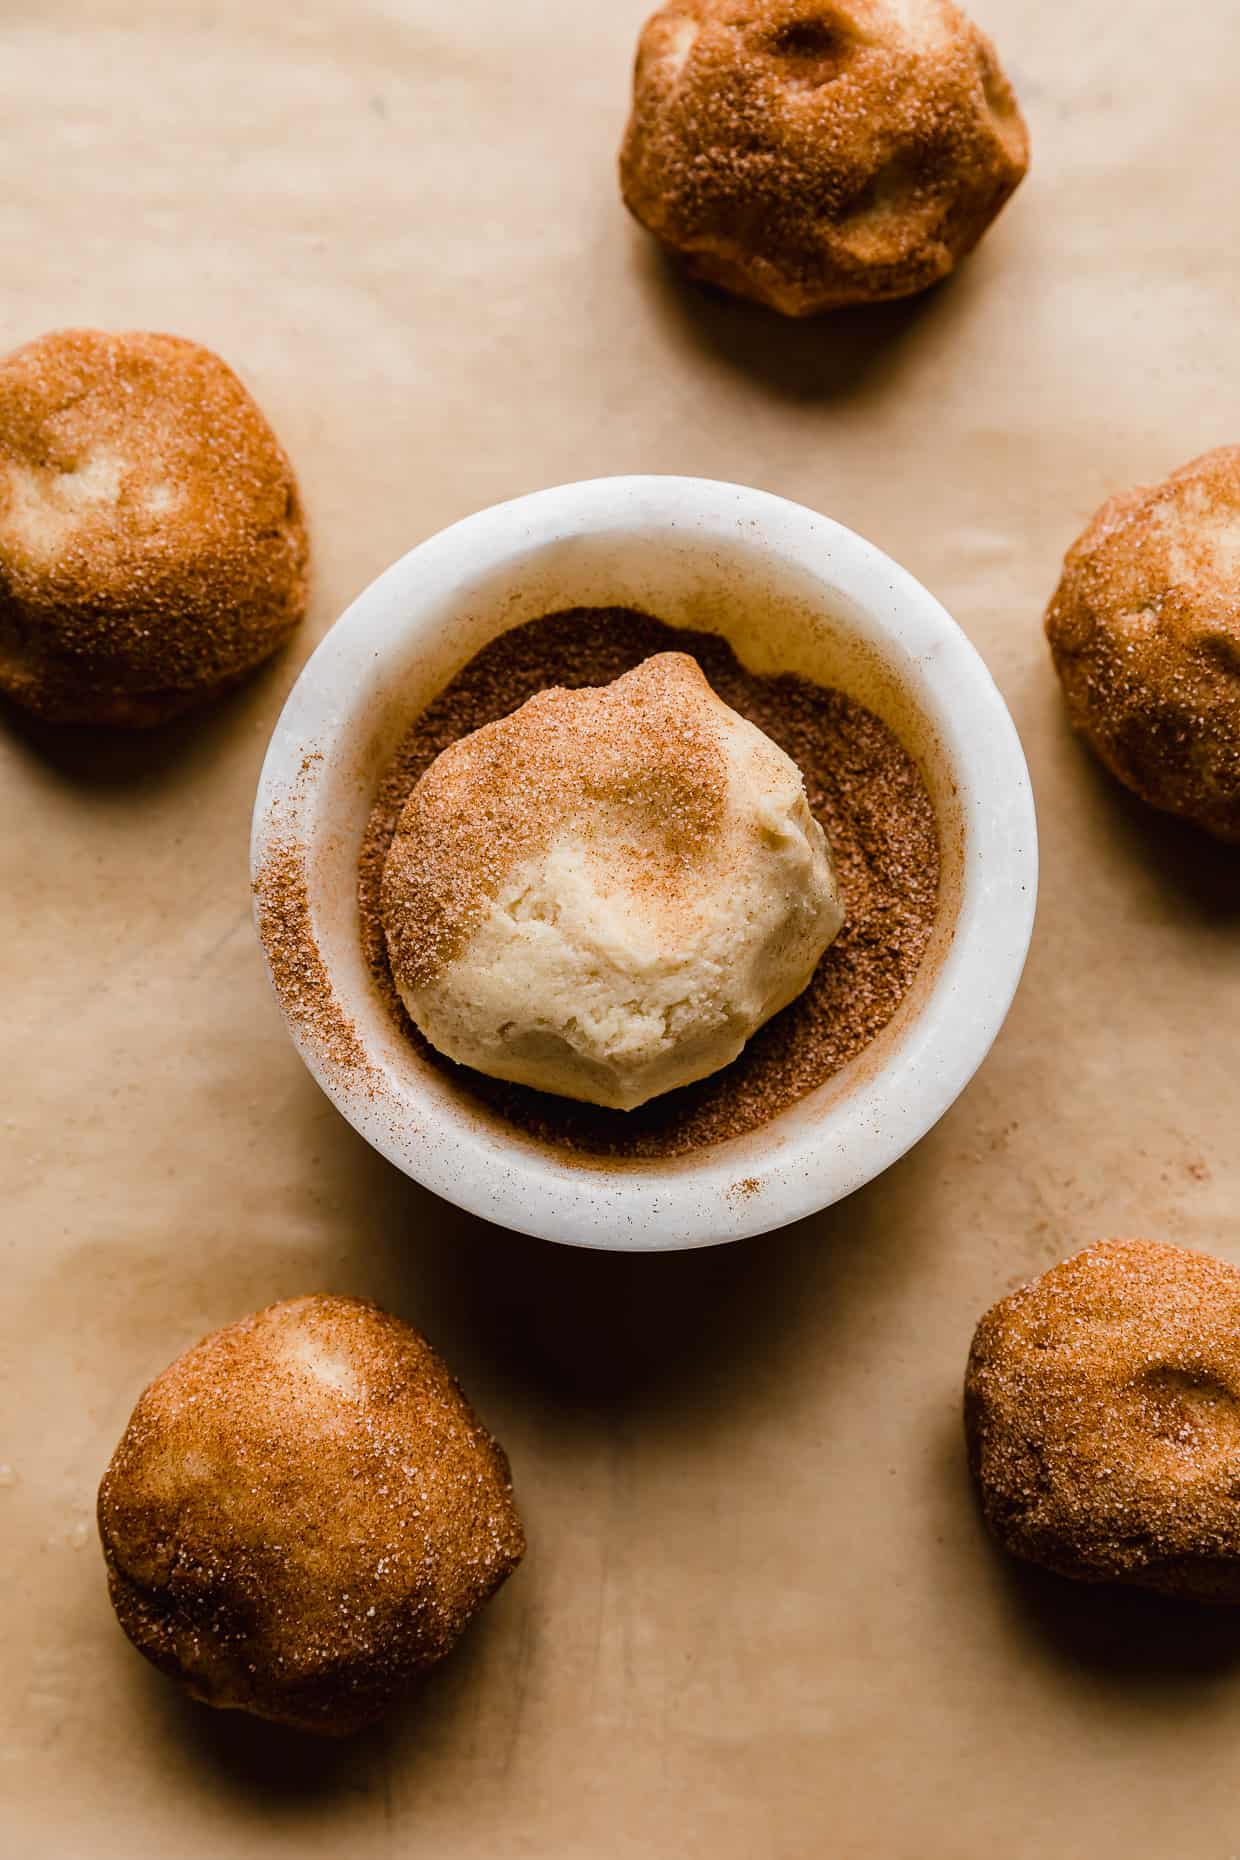 A cookie dough ball in a bowl filled with cinnamon sugar.